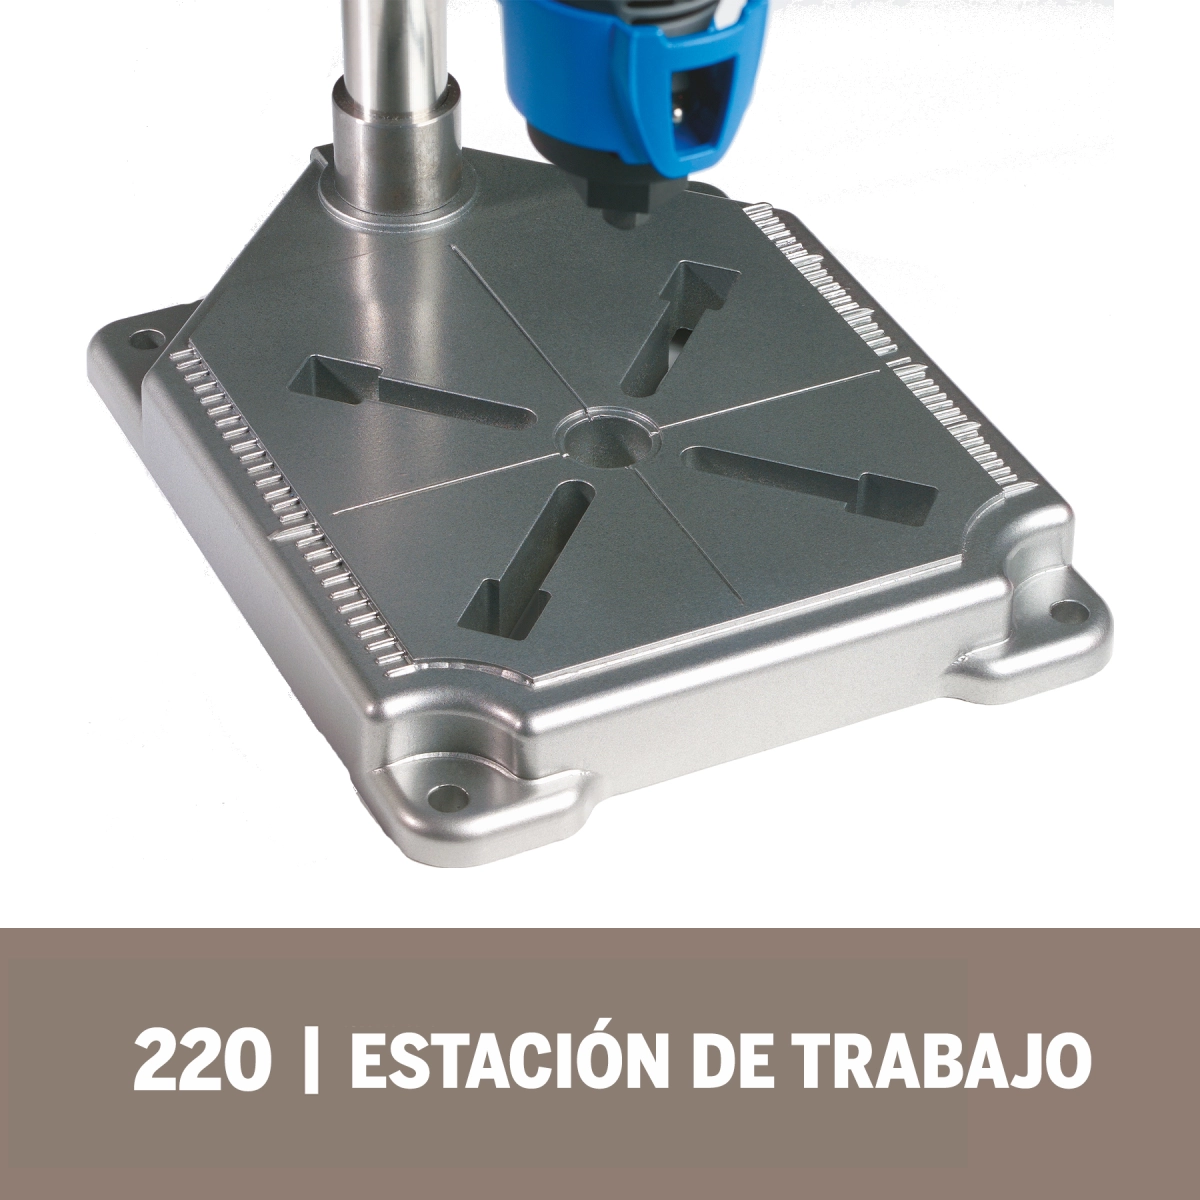 How to assemble the Dremel WorkStation™ 220-01 